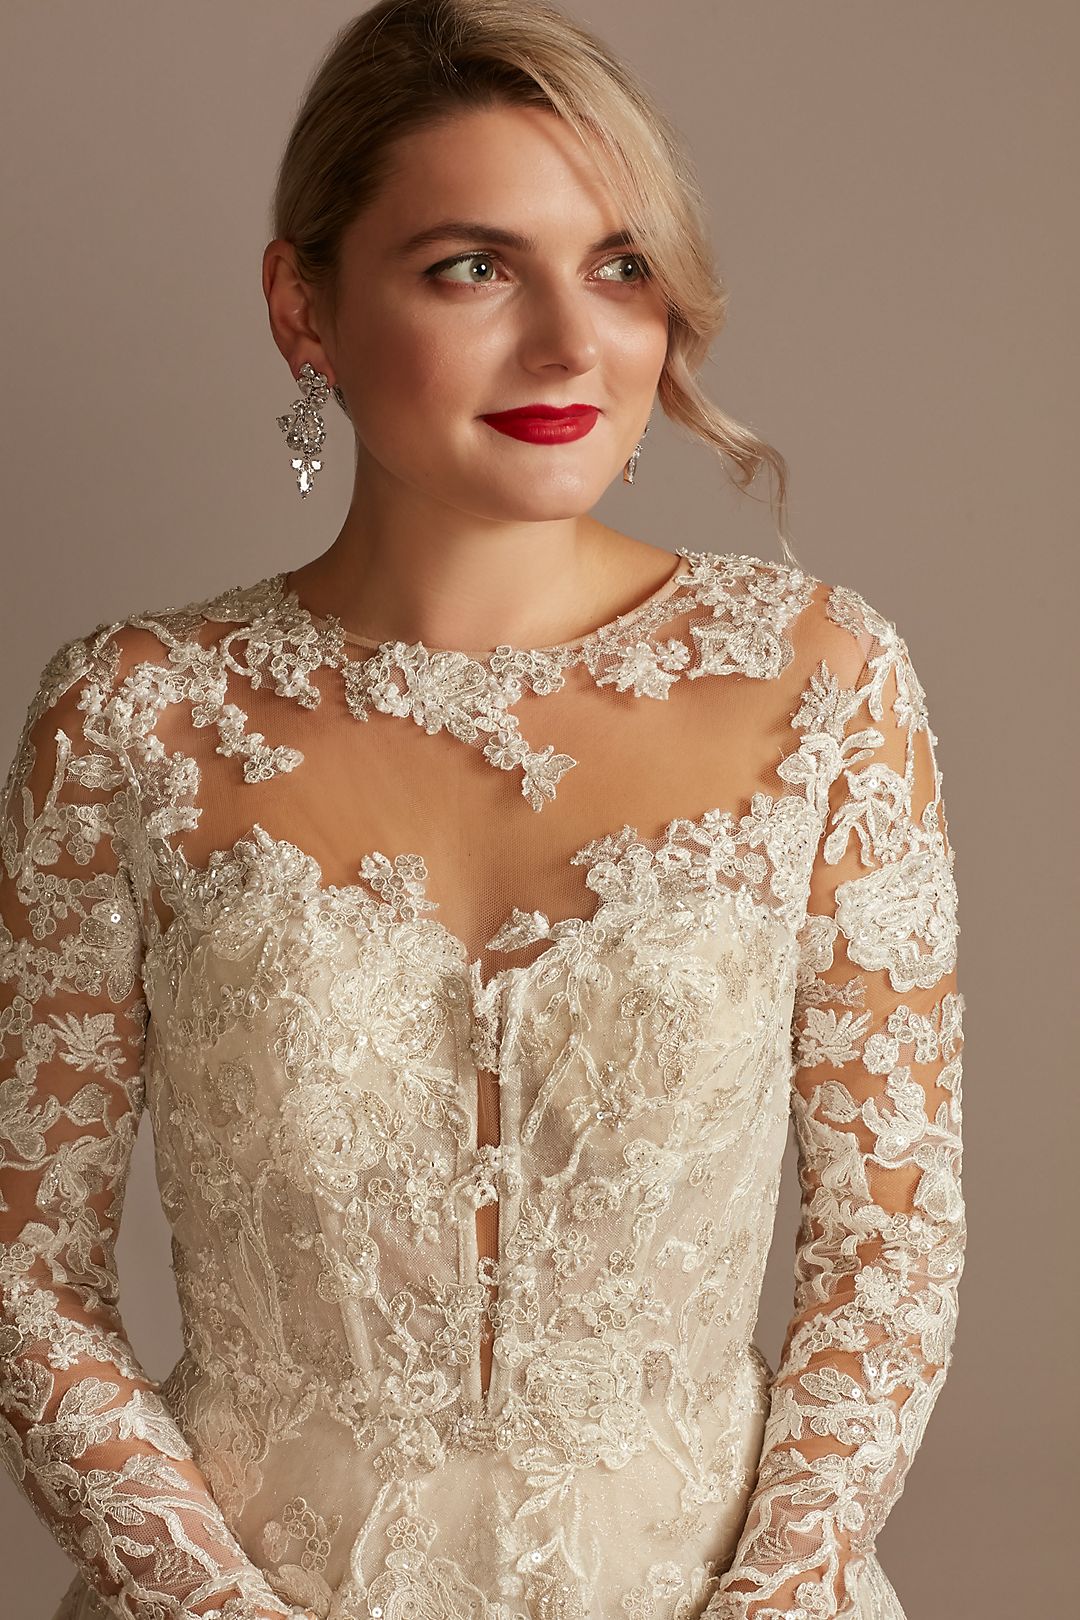 Lace Illusion Long Sleeve Ball Gown Wedding Dress Image 4